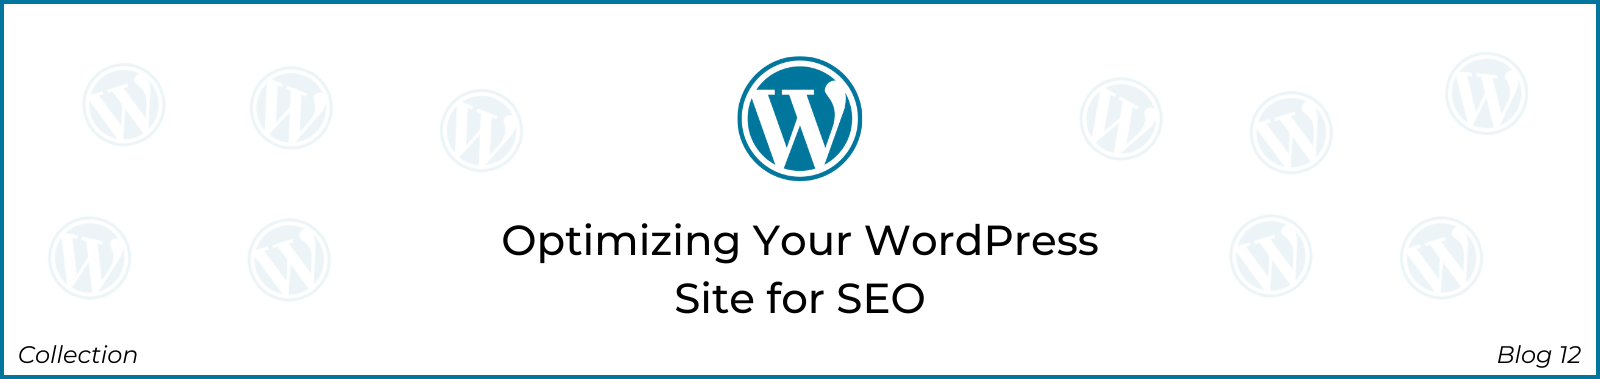 Optimizing Your WordPress Site for SEO